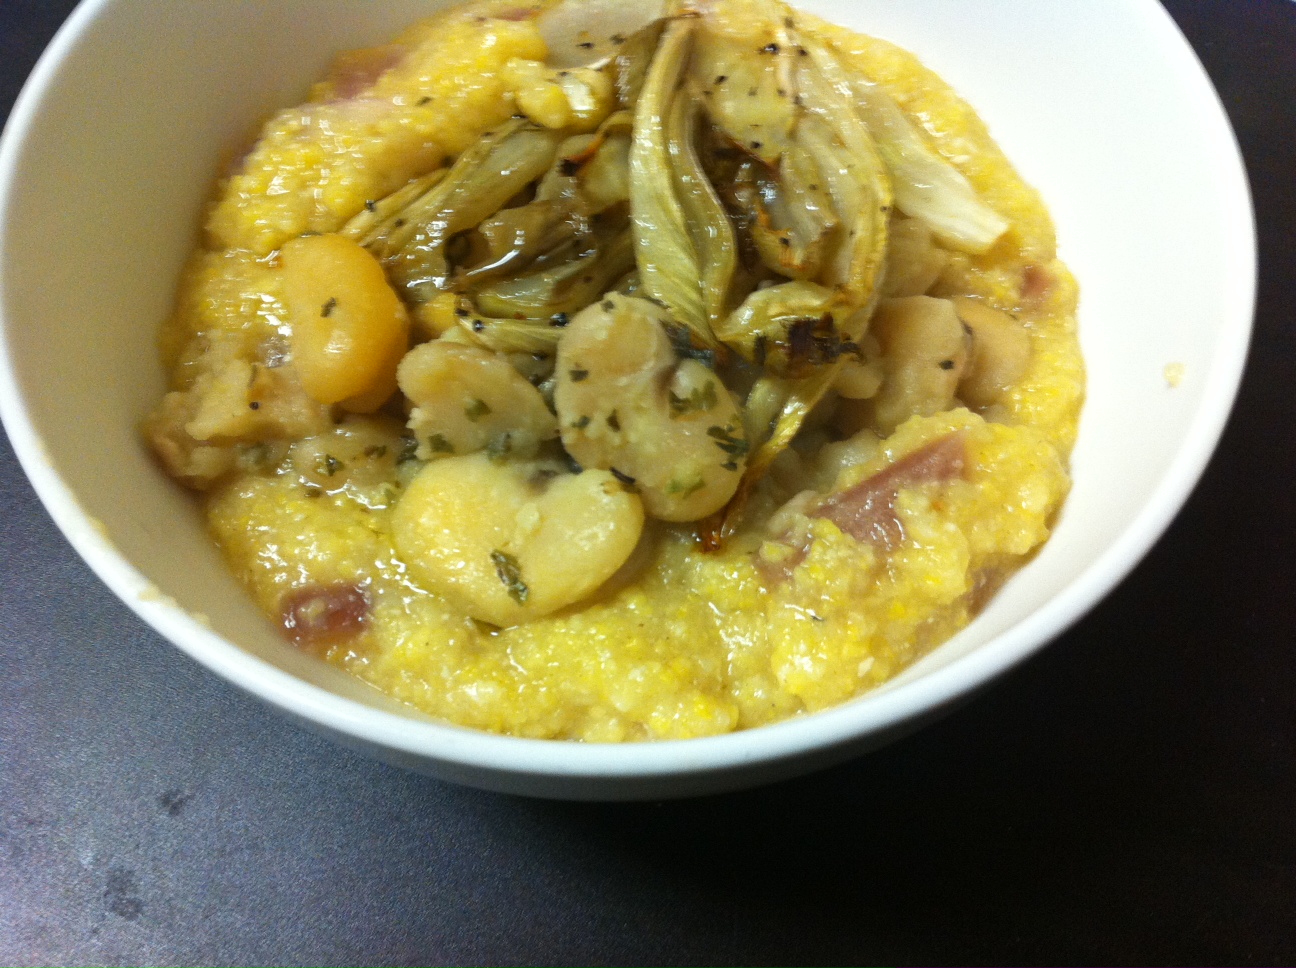 broad-beans-with-savory-grits-inspired-vegan-bryant-terry